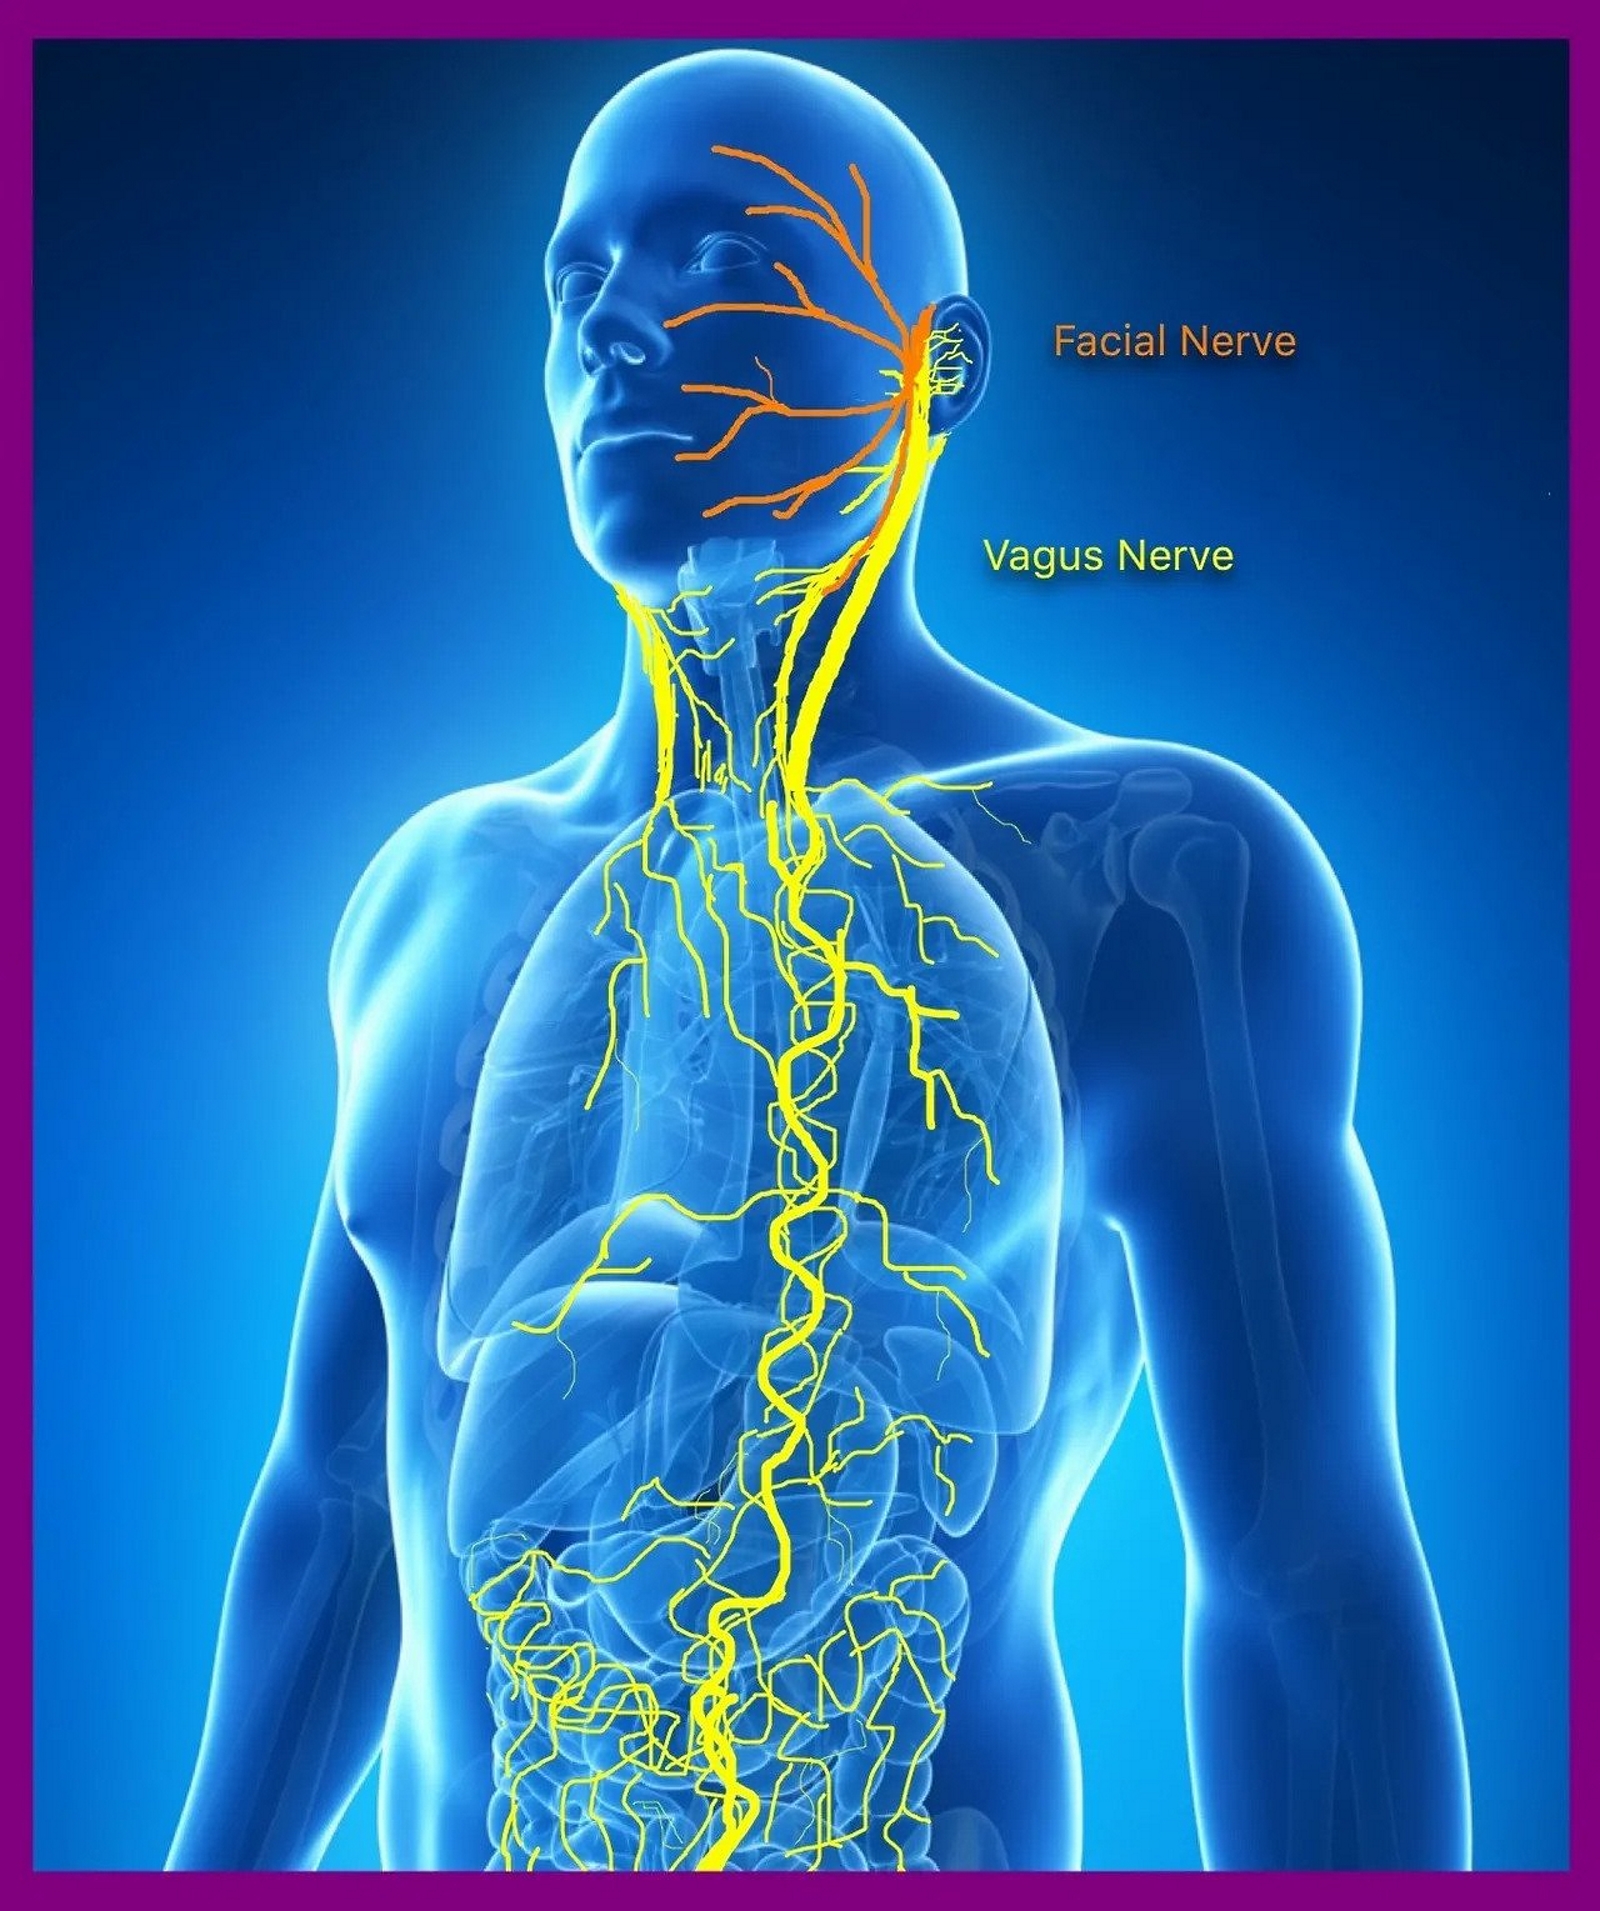 The image shows the path of the vagus nerve (and a section of the facial nerve).